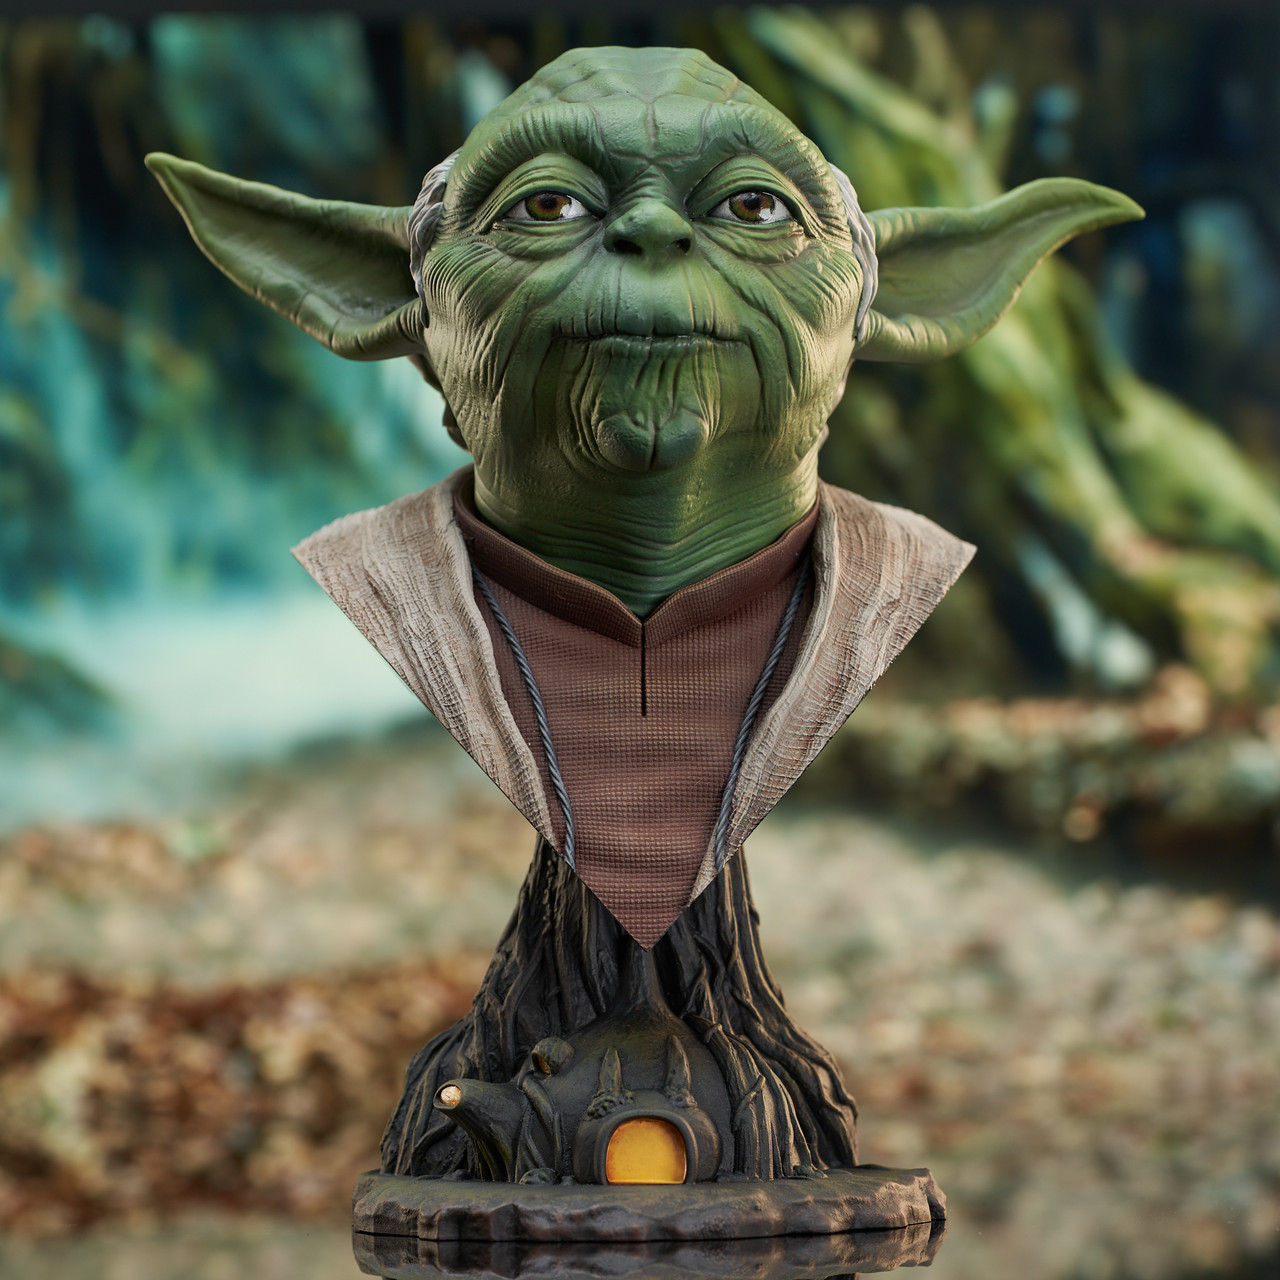 how old is master yoda